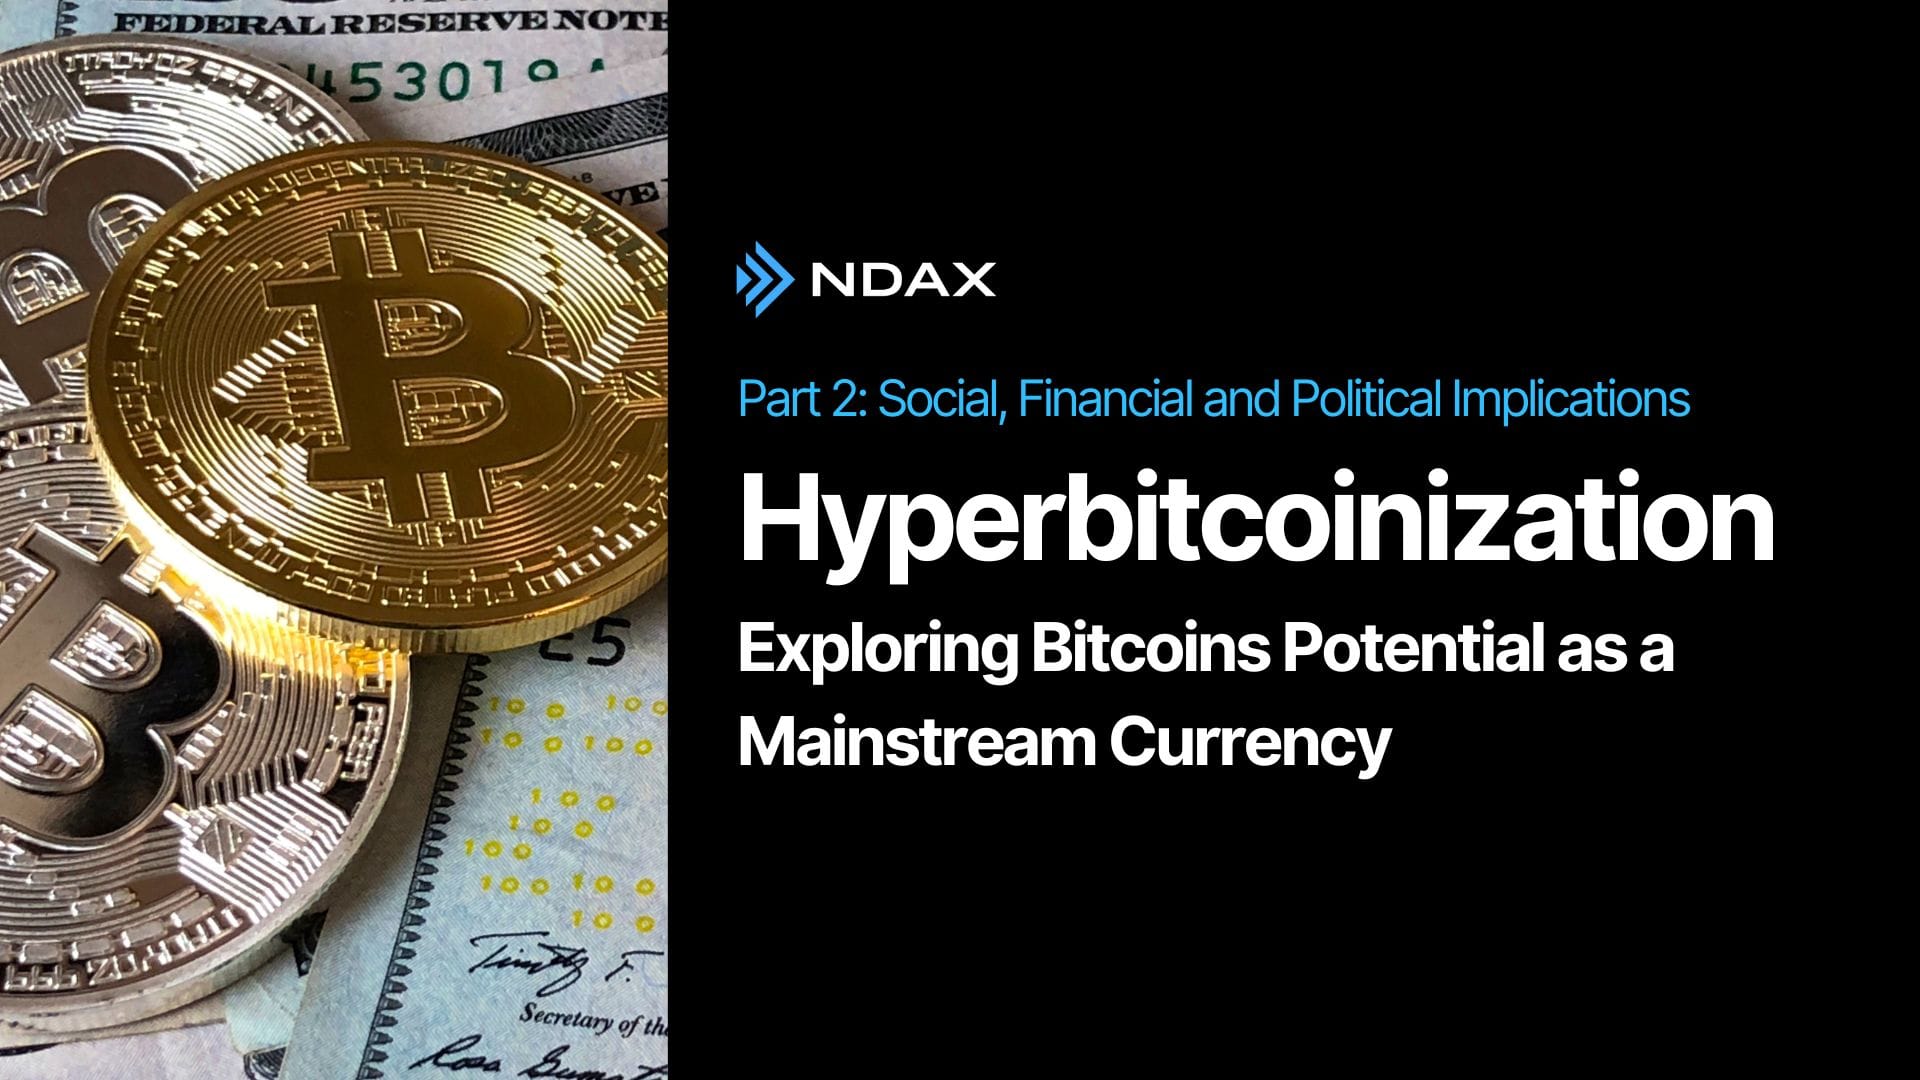 Hyperbitcoinization: Exploring Bitcoins Potential as a Mainstream Currency - Part II